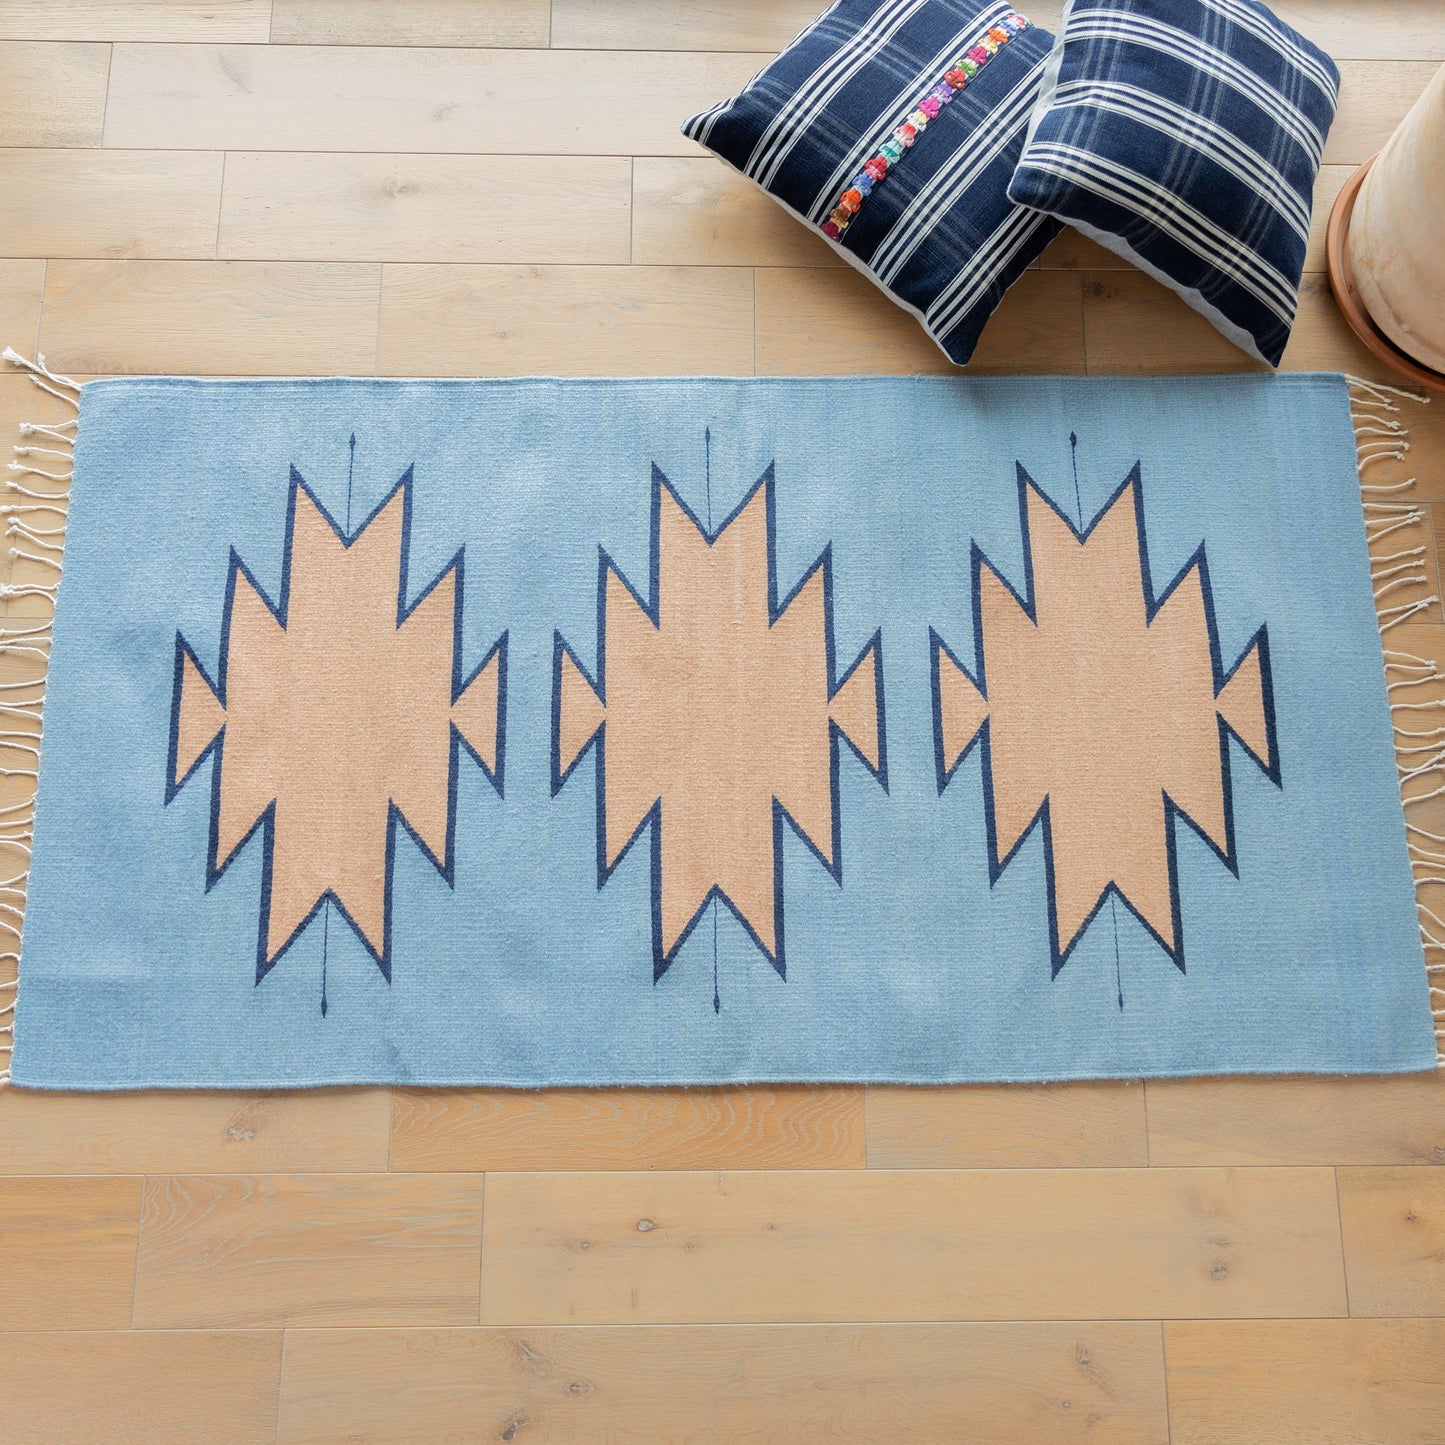 MEXICO COLLECTION - ZAPOTEC HAND-LOOMED WOOL RUG - 3 x 5' - NO. 17372